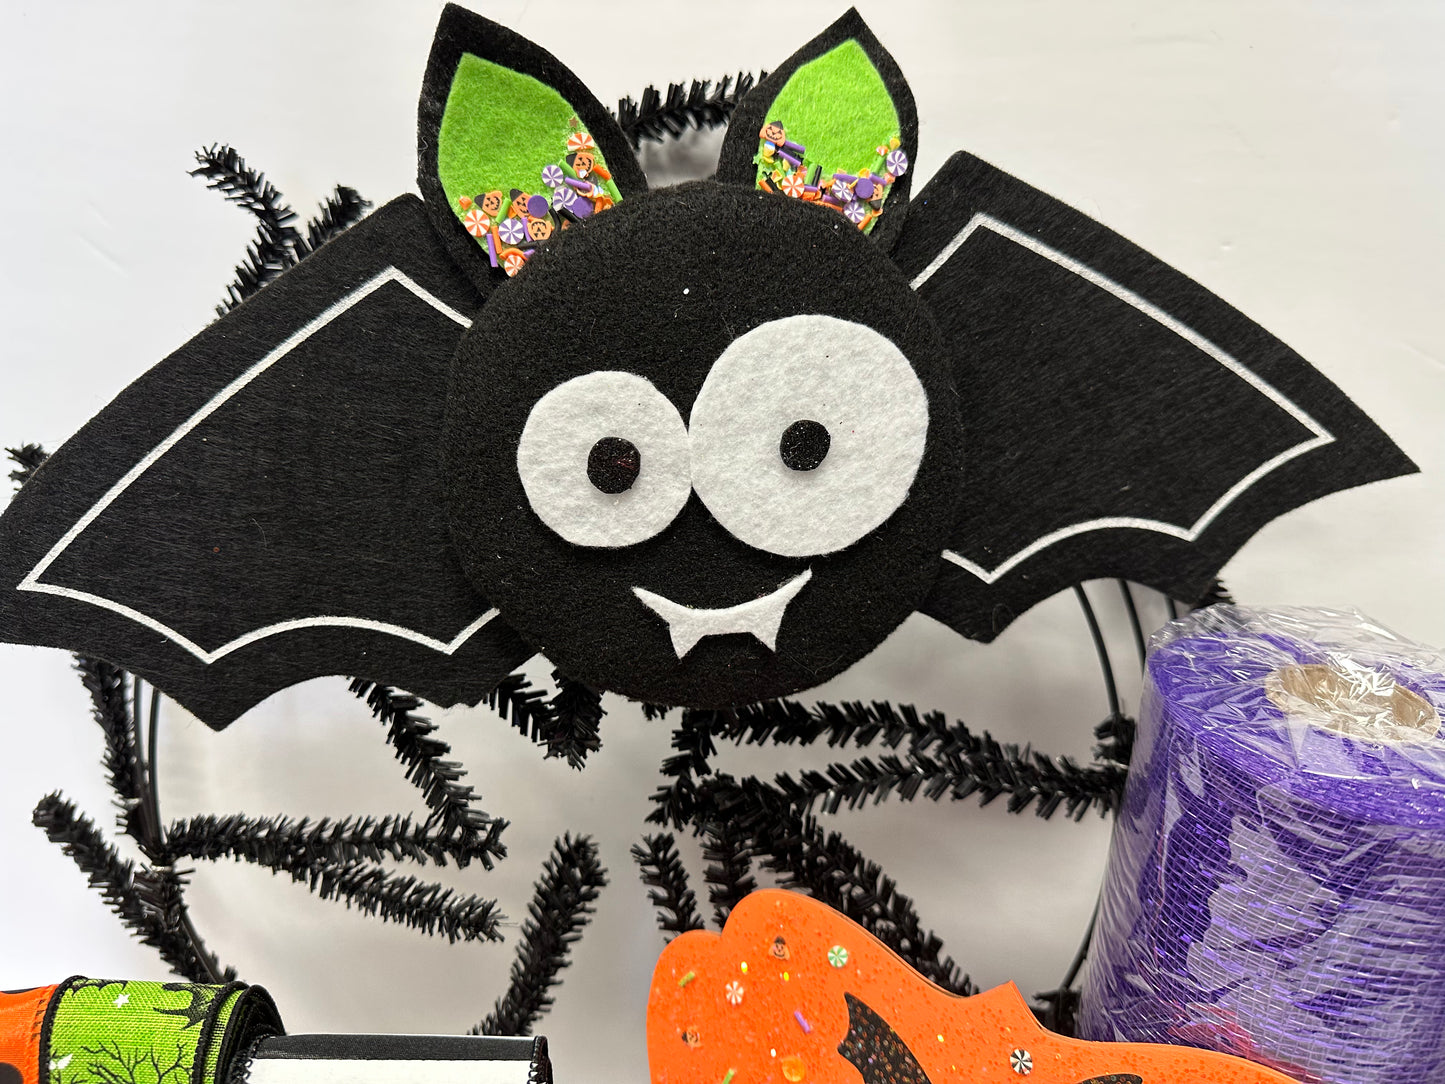 Party Kit - Batty for Candy Halloween Party Kit